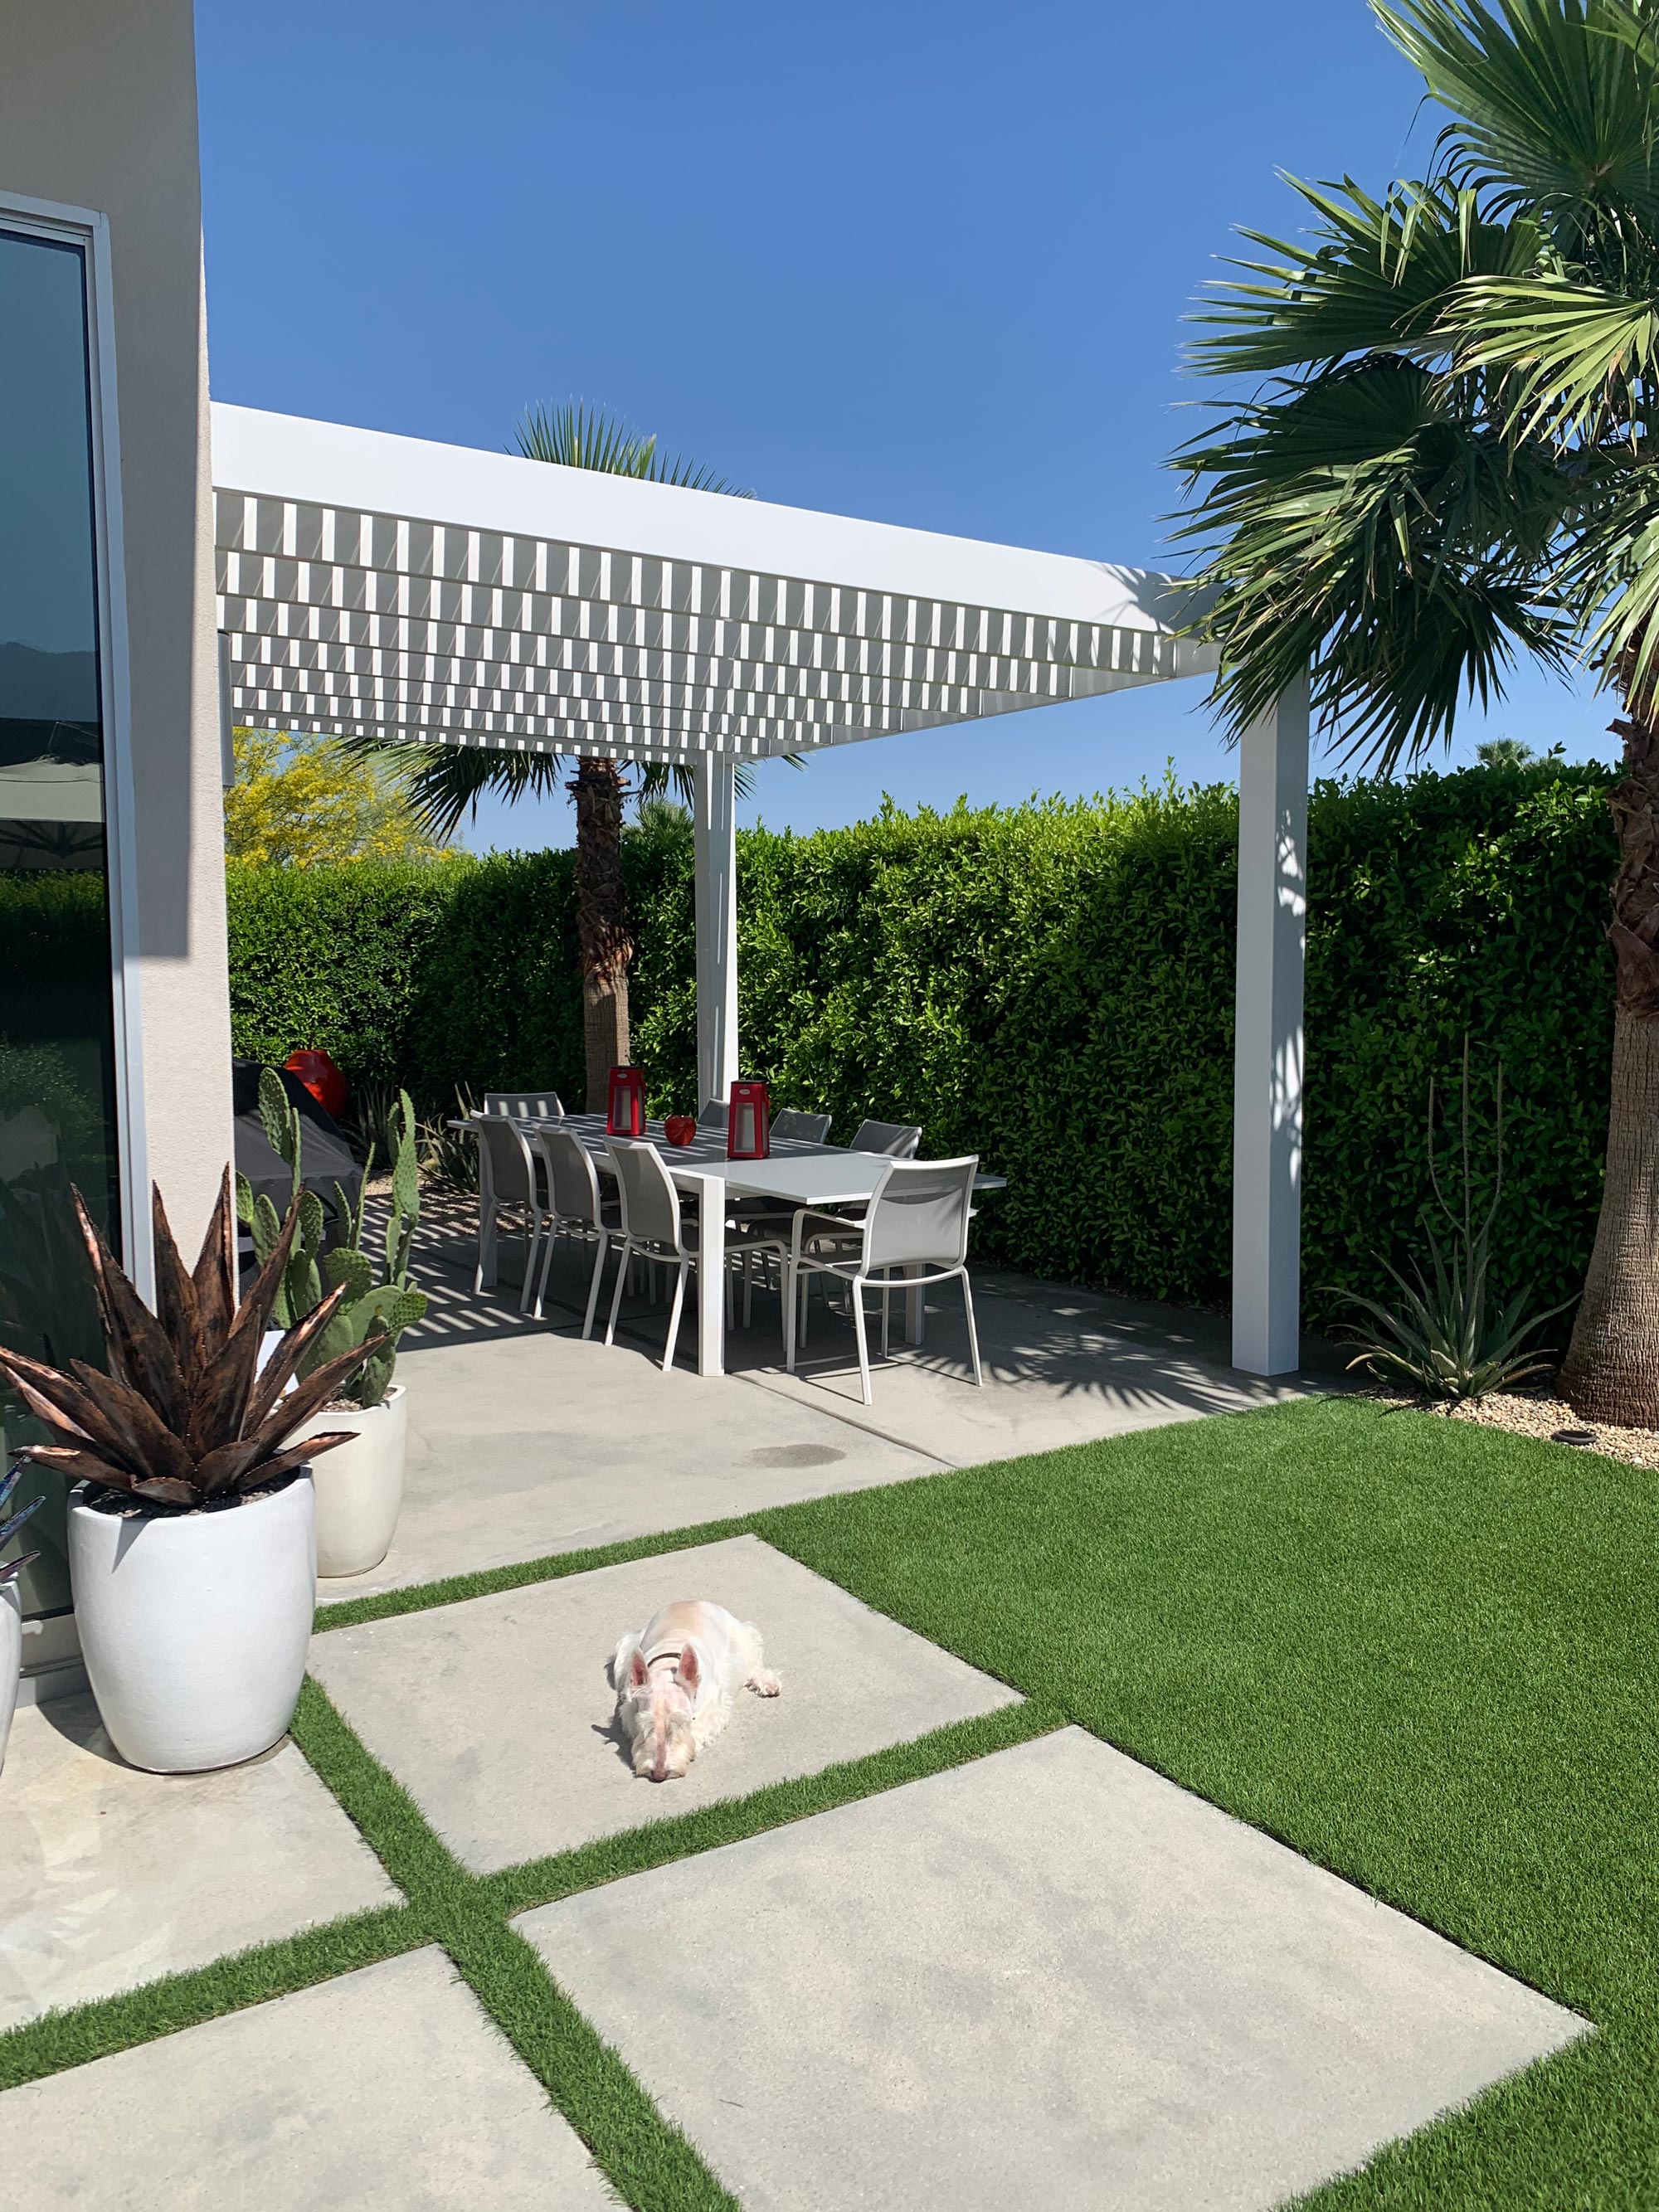 modern pergola over patio with outdoor dining table and cute puppy sleeping